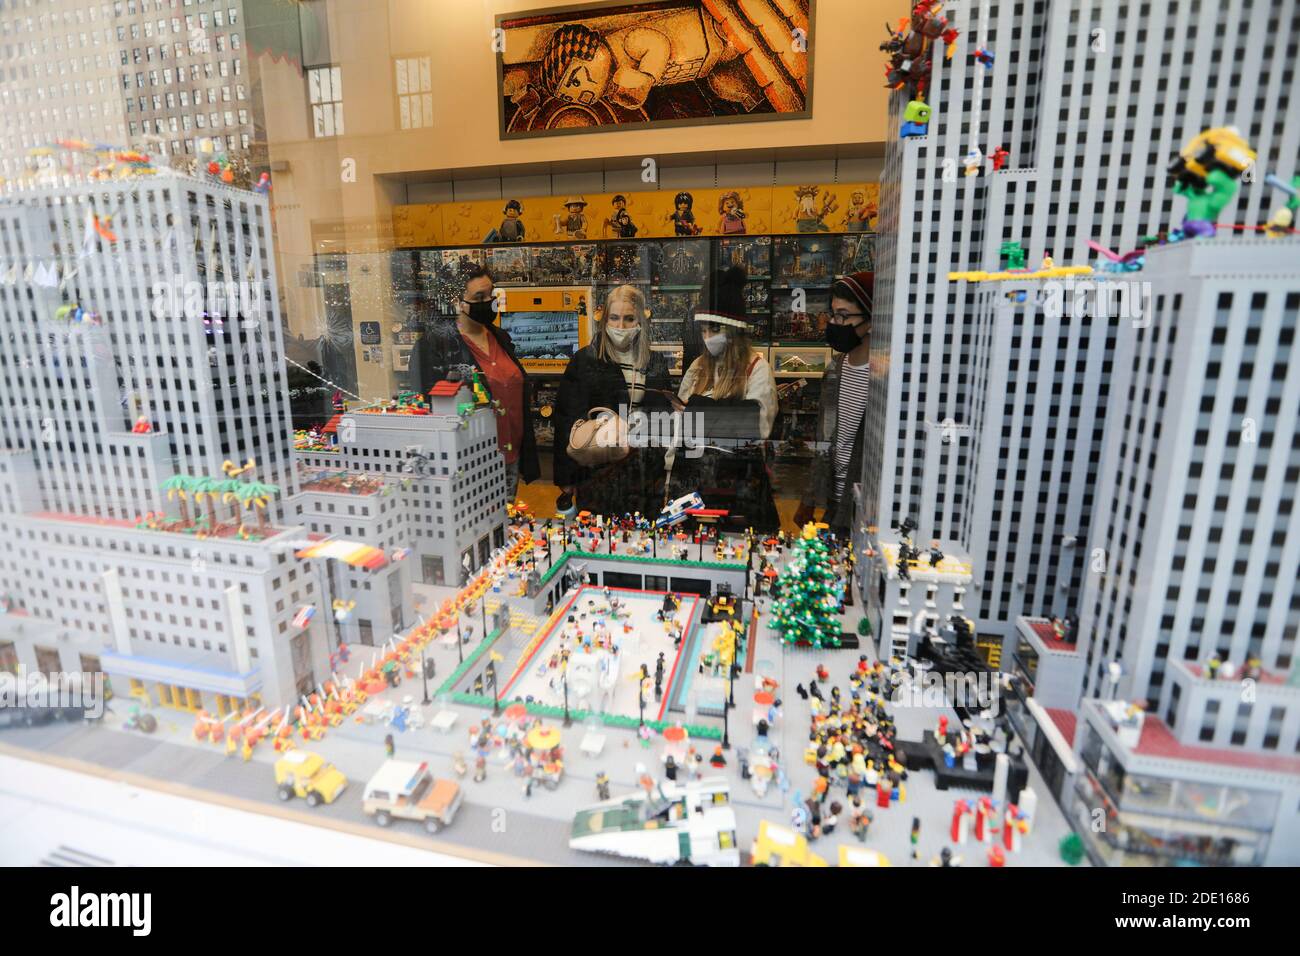 Lego Store New York 2020 High Resolution Stock Photography and Images -  Alamy